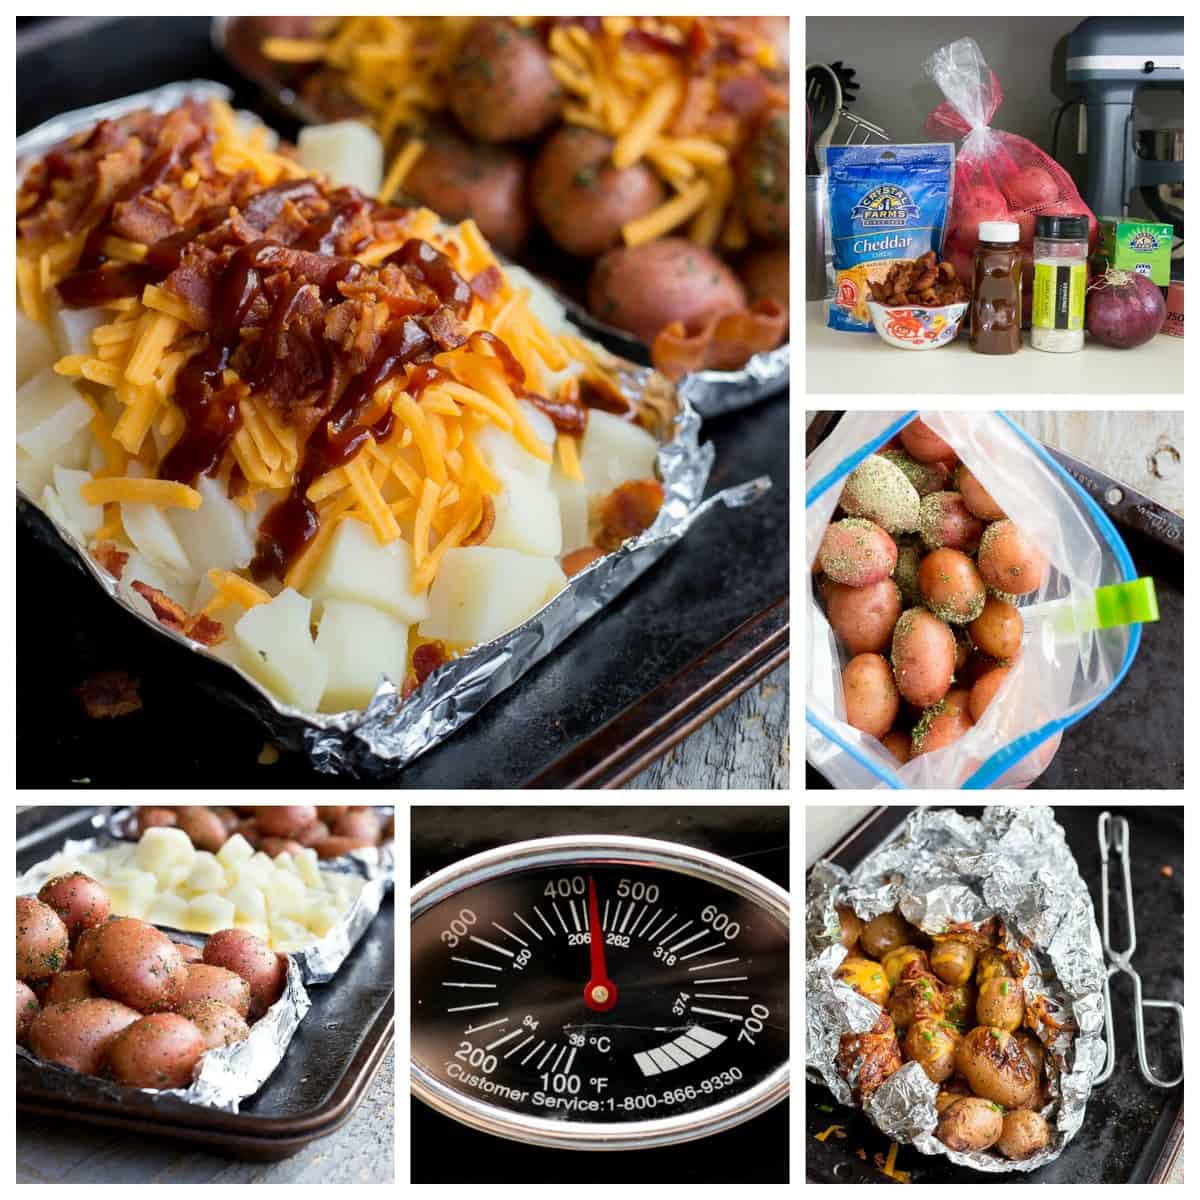 Cheddar Bacon Potato Bundles: Chopped red potatoes topped with pepper, spicy BBQ sauce, a mound of shredded cheese and bacon.. You have to make these crazy-easy grilled potato bundles this summer. These foil wrapped potato packets are super simple and delicious. Perfect for camping or just a quick family dinner. *Saving this for later!